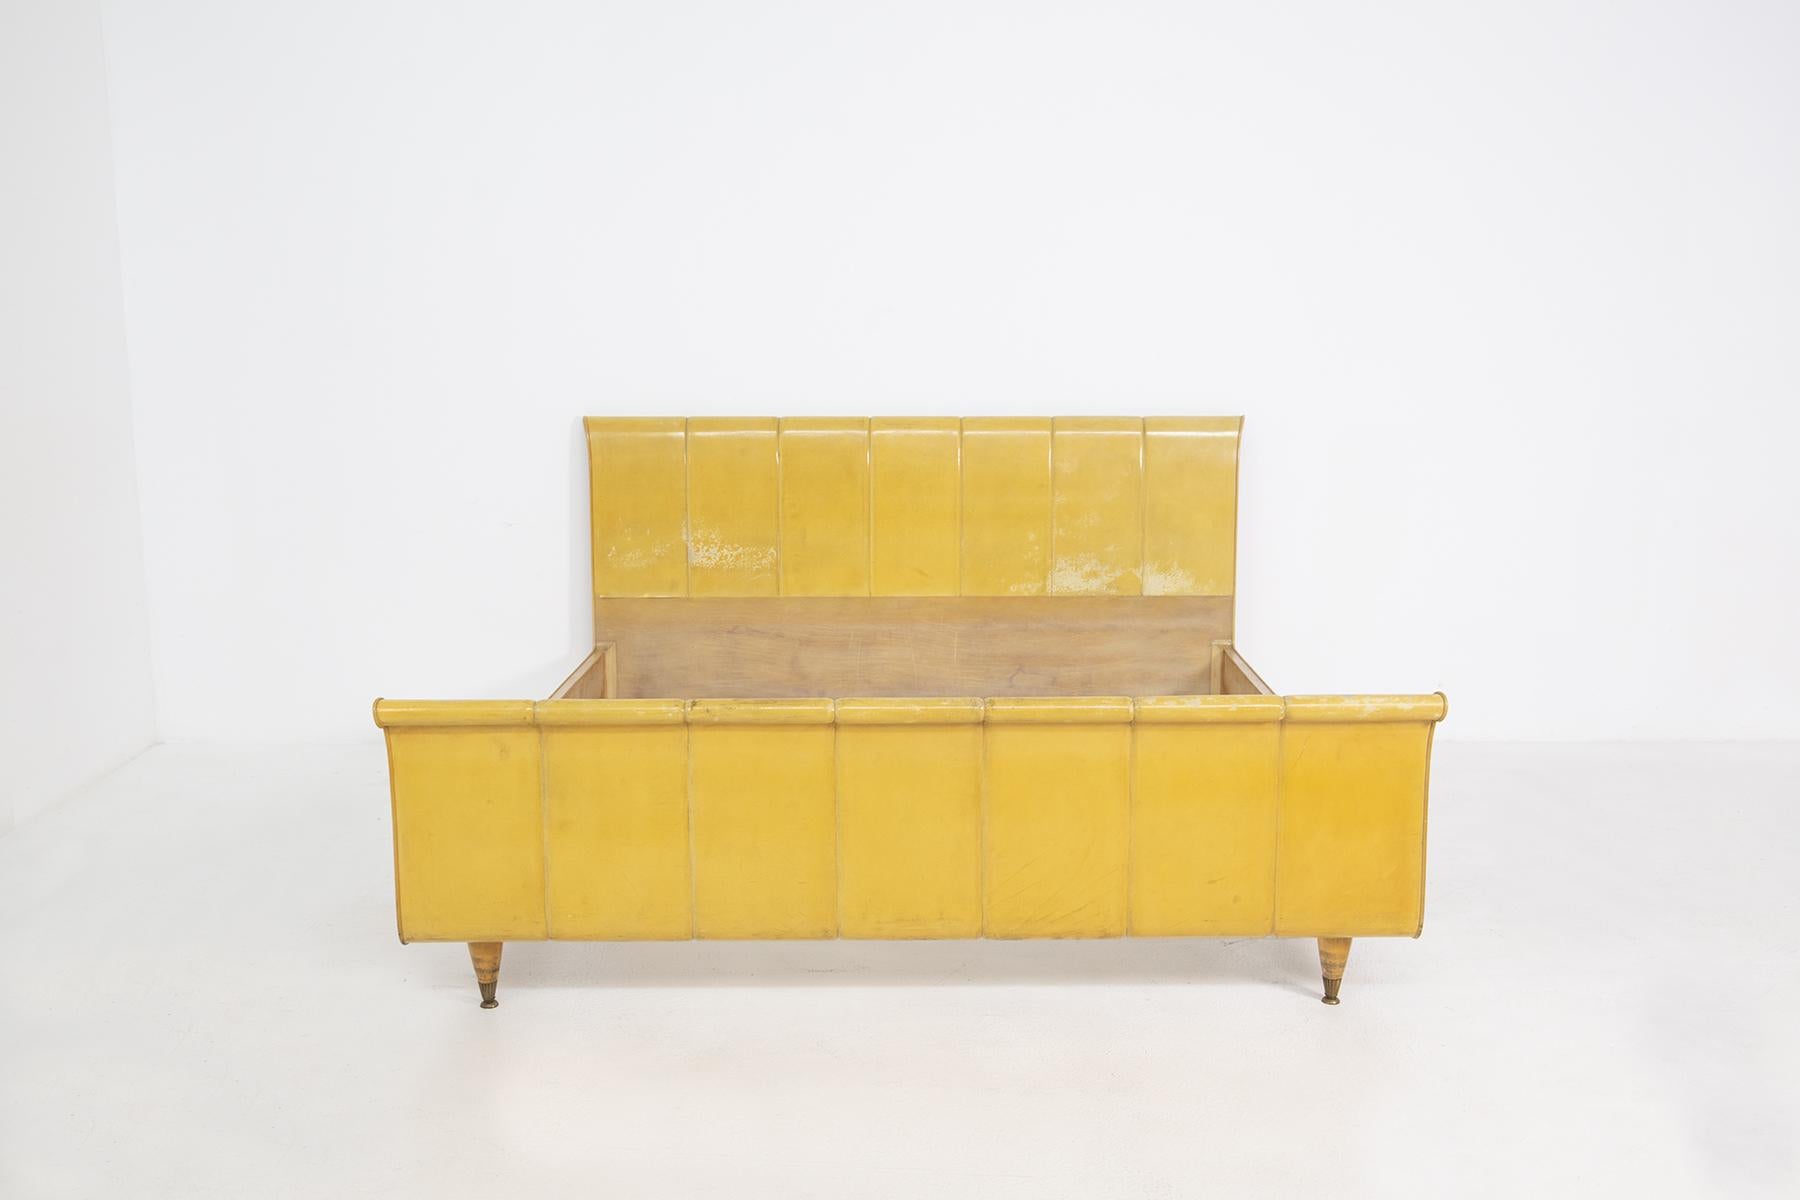 Luxurious and elegant Italian parchment and wood bed from the 1950s.
The bed is made of yellow parchment for the two headboards.
The headboards of the bed, both the front and the back, have inlets that create a soft play of volumes, almost recalling